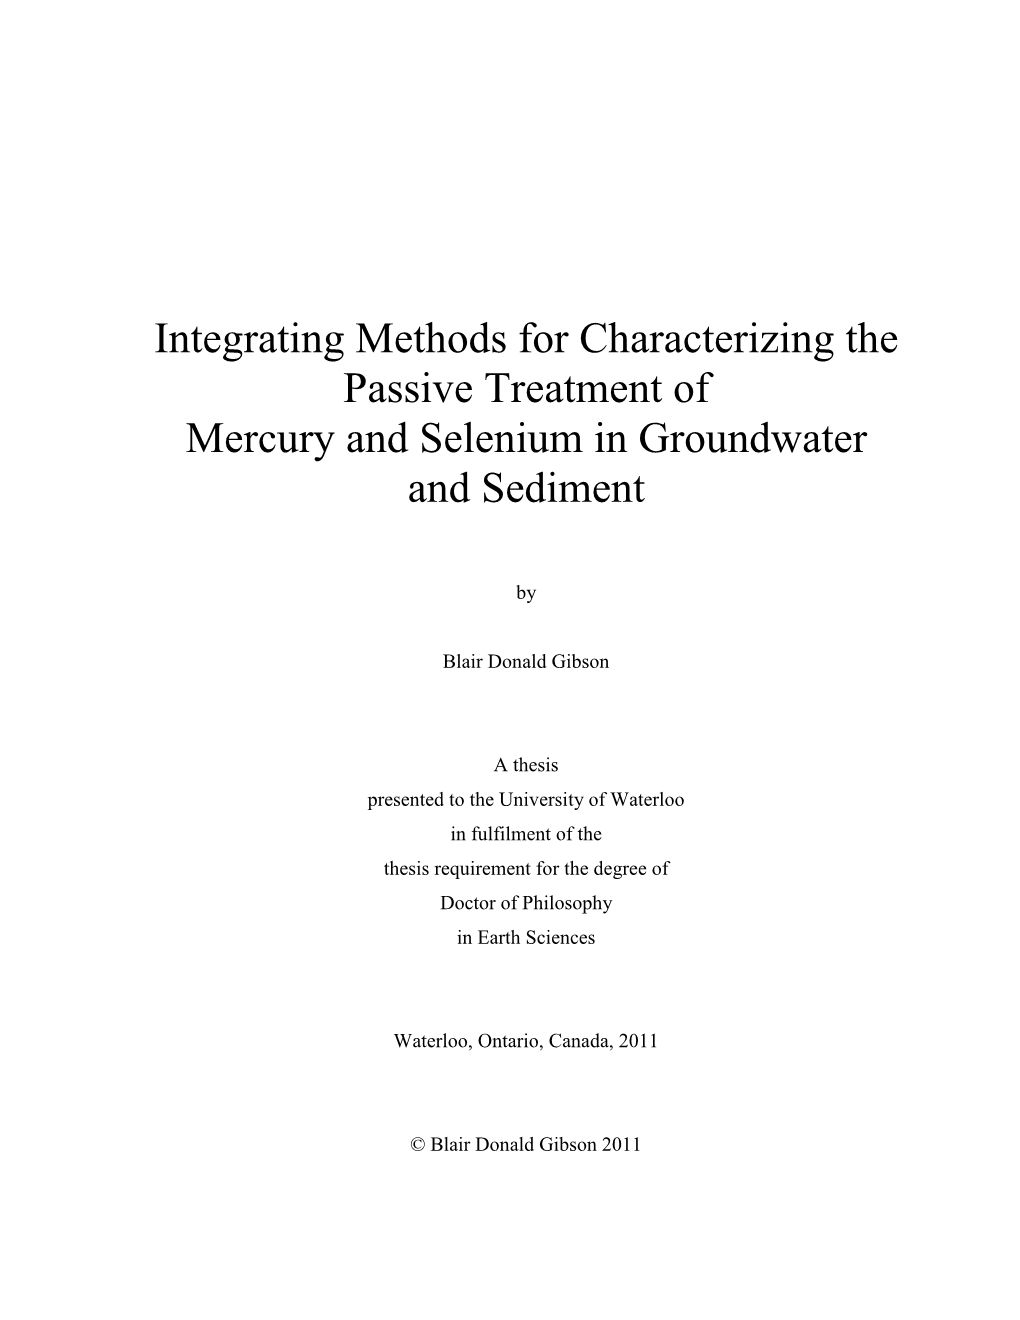 Integrating Methods for Characterizing the Passive Treatment of Mercury and Selenium in Groundwater and Sediment